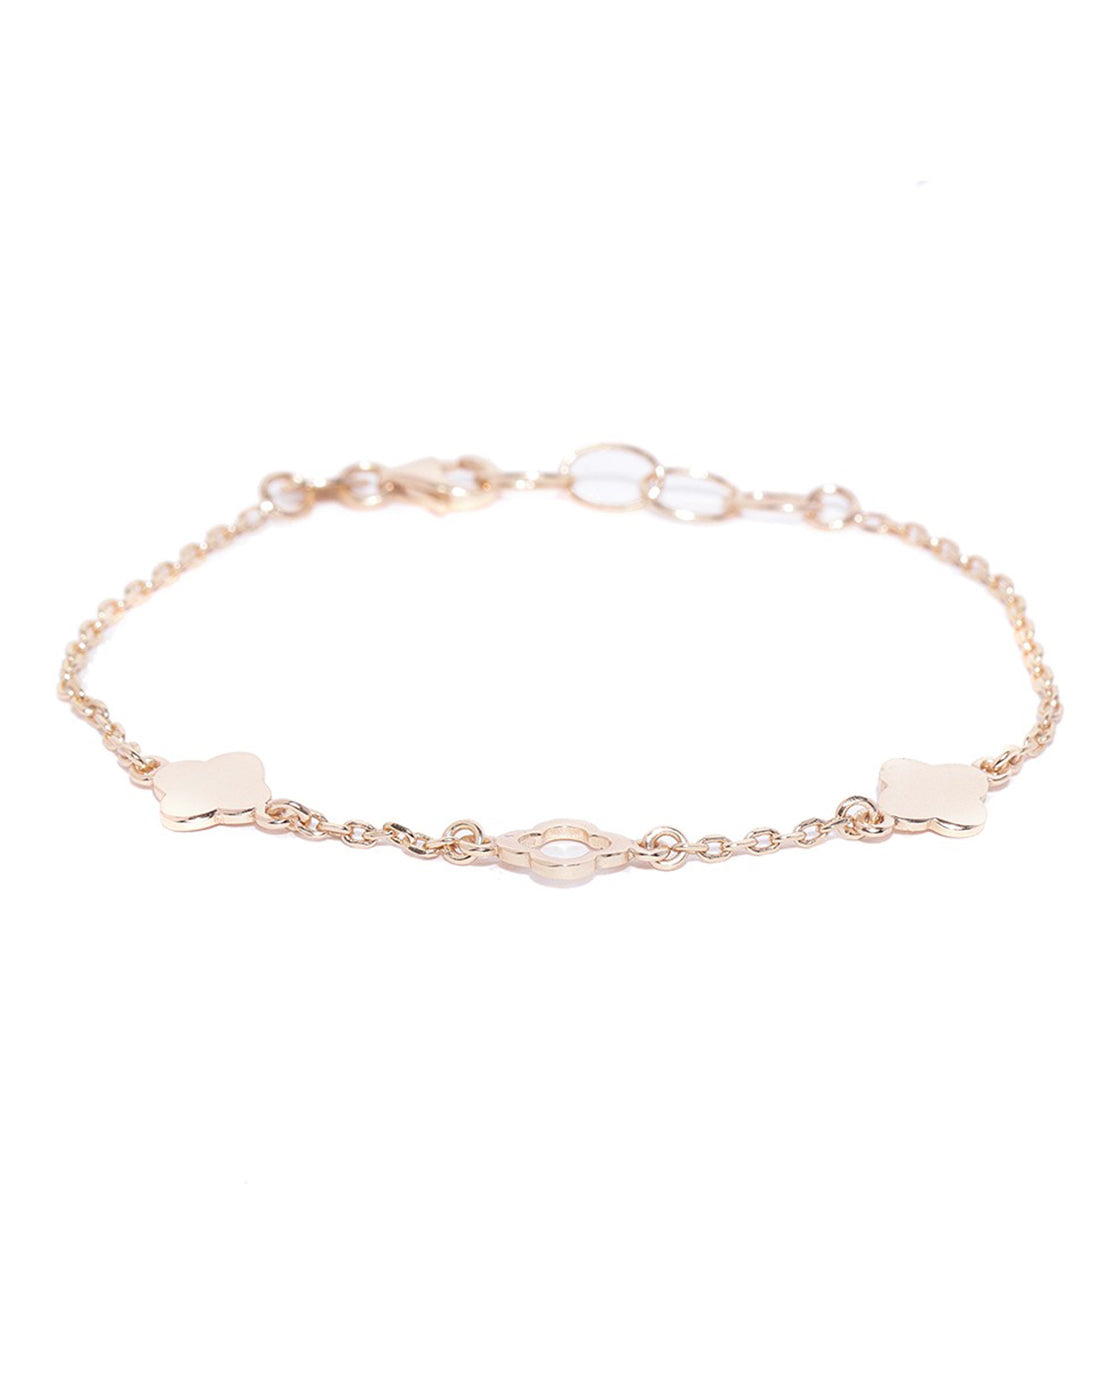 23 Beautiful Rose Gold Bracelets for Men and Women